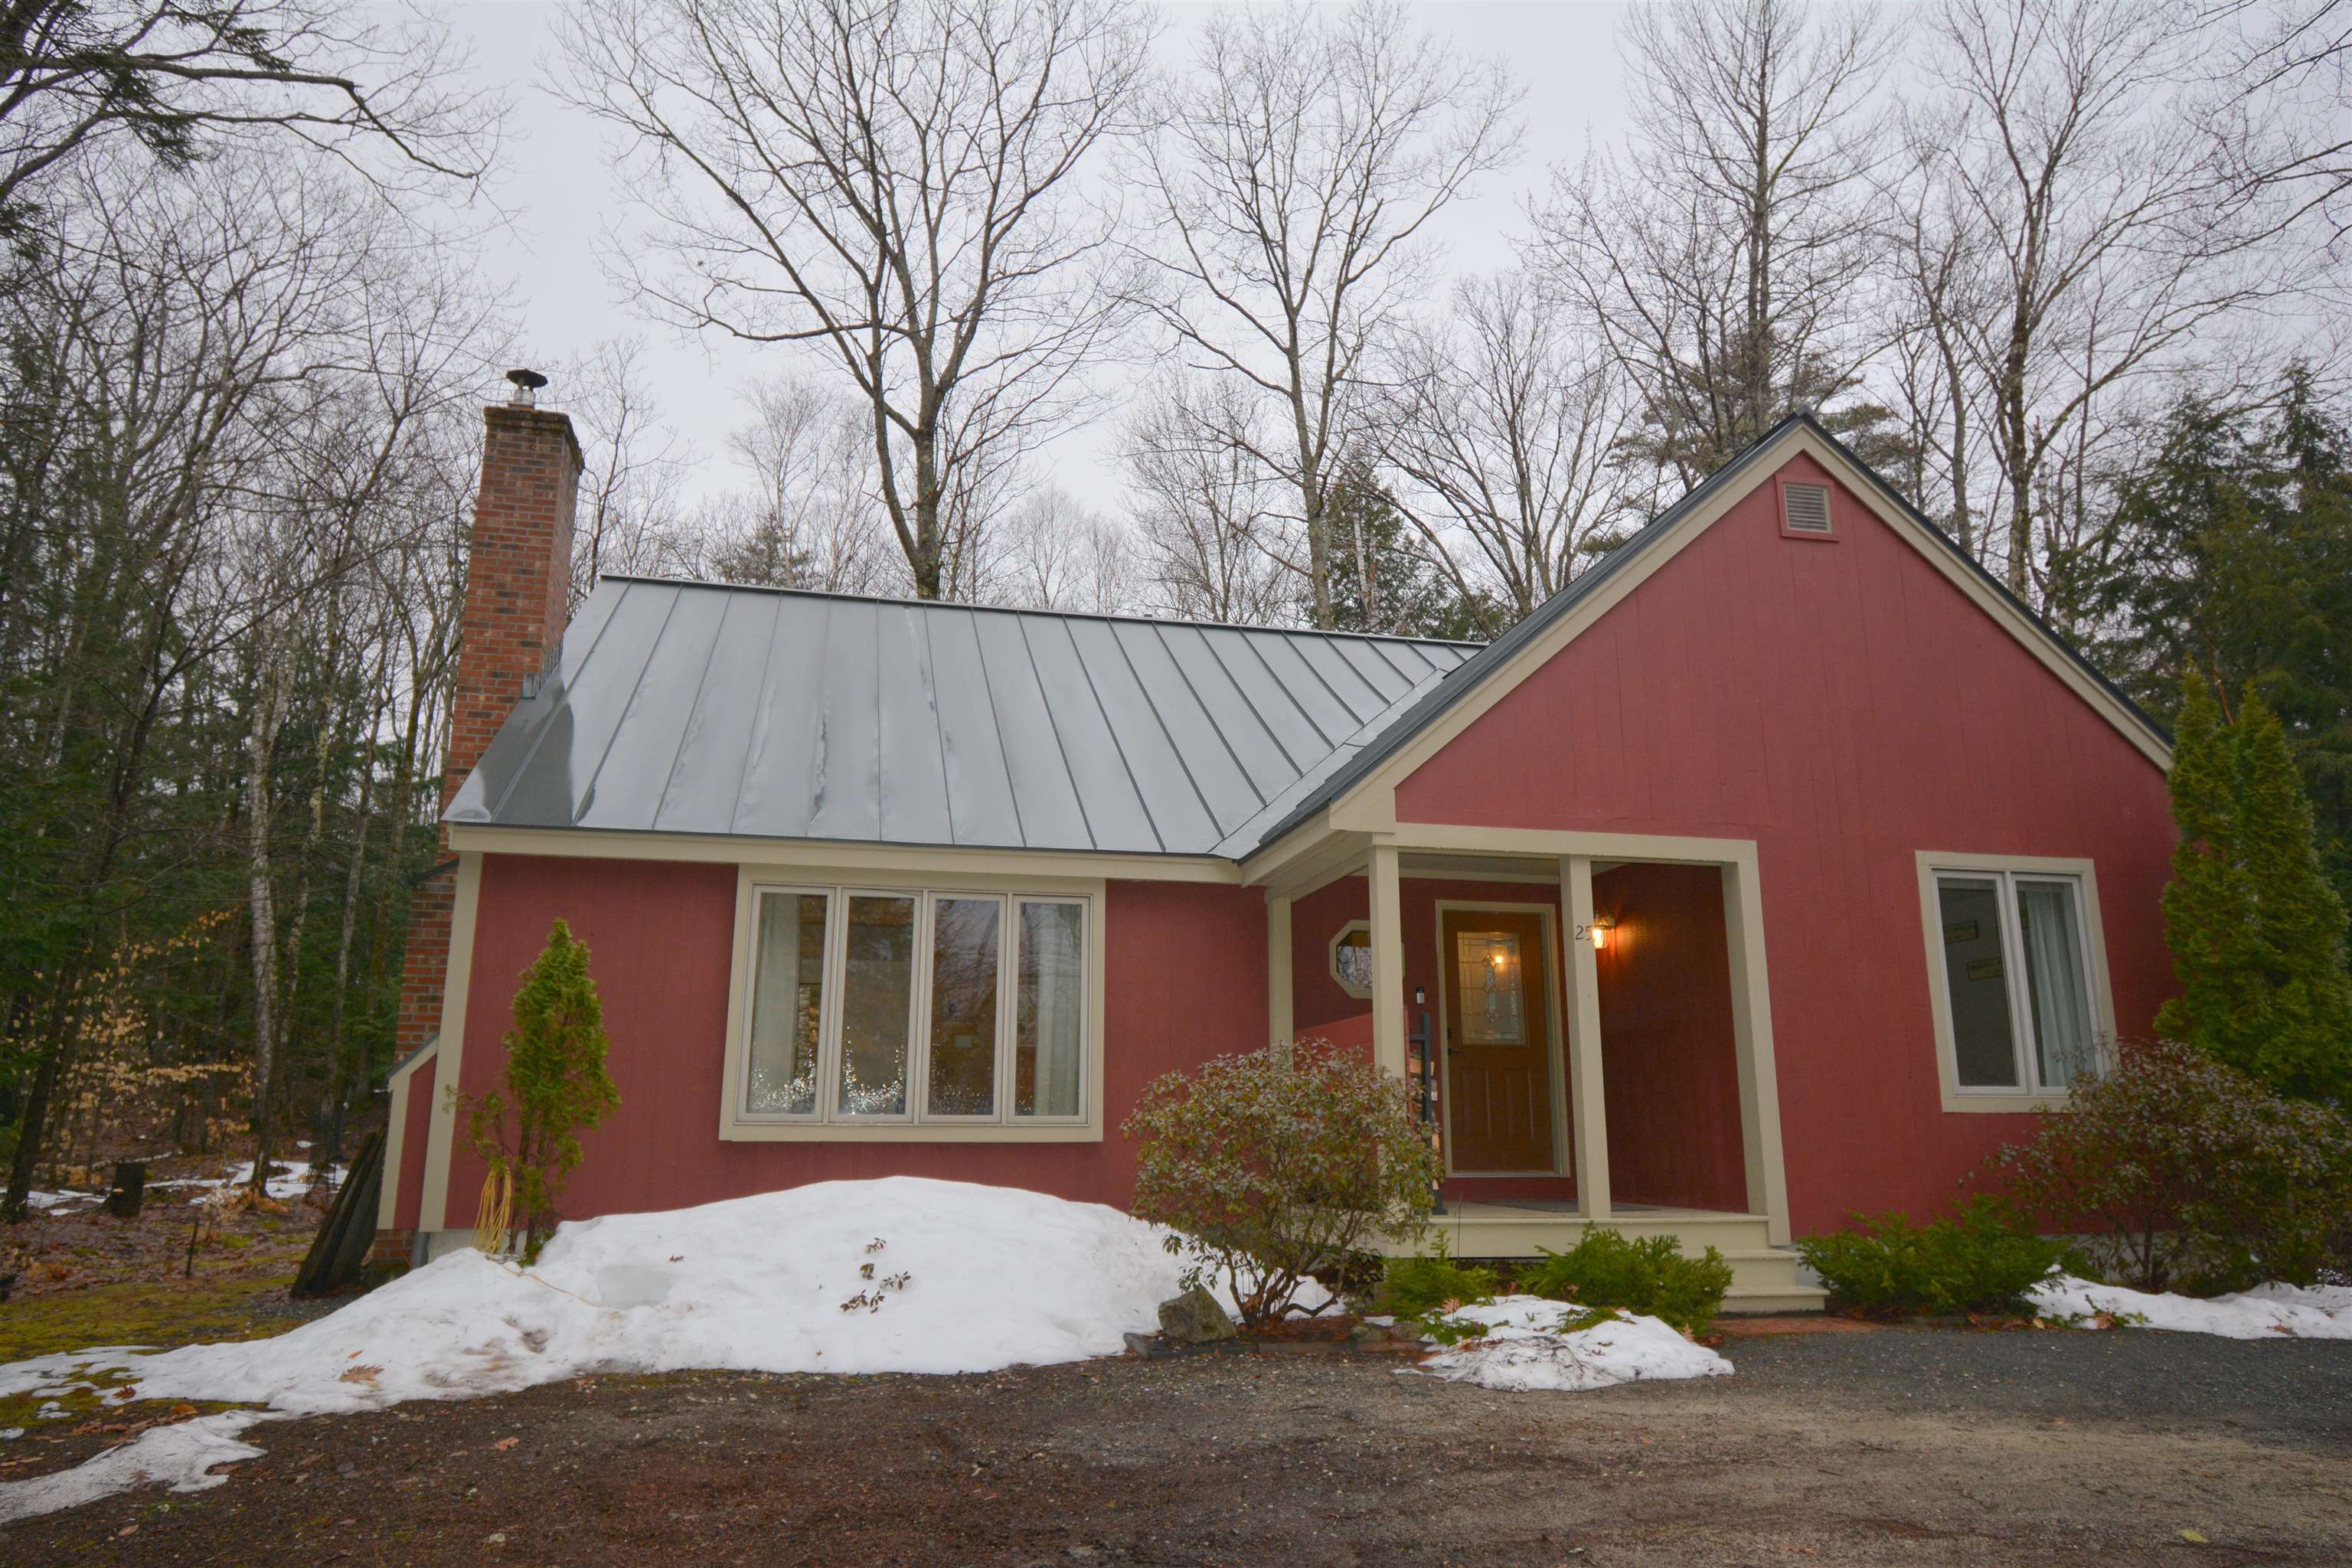 Village of Eastman in Town of Grantham NH Home for sale $437,025 $276 per sq.ft.